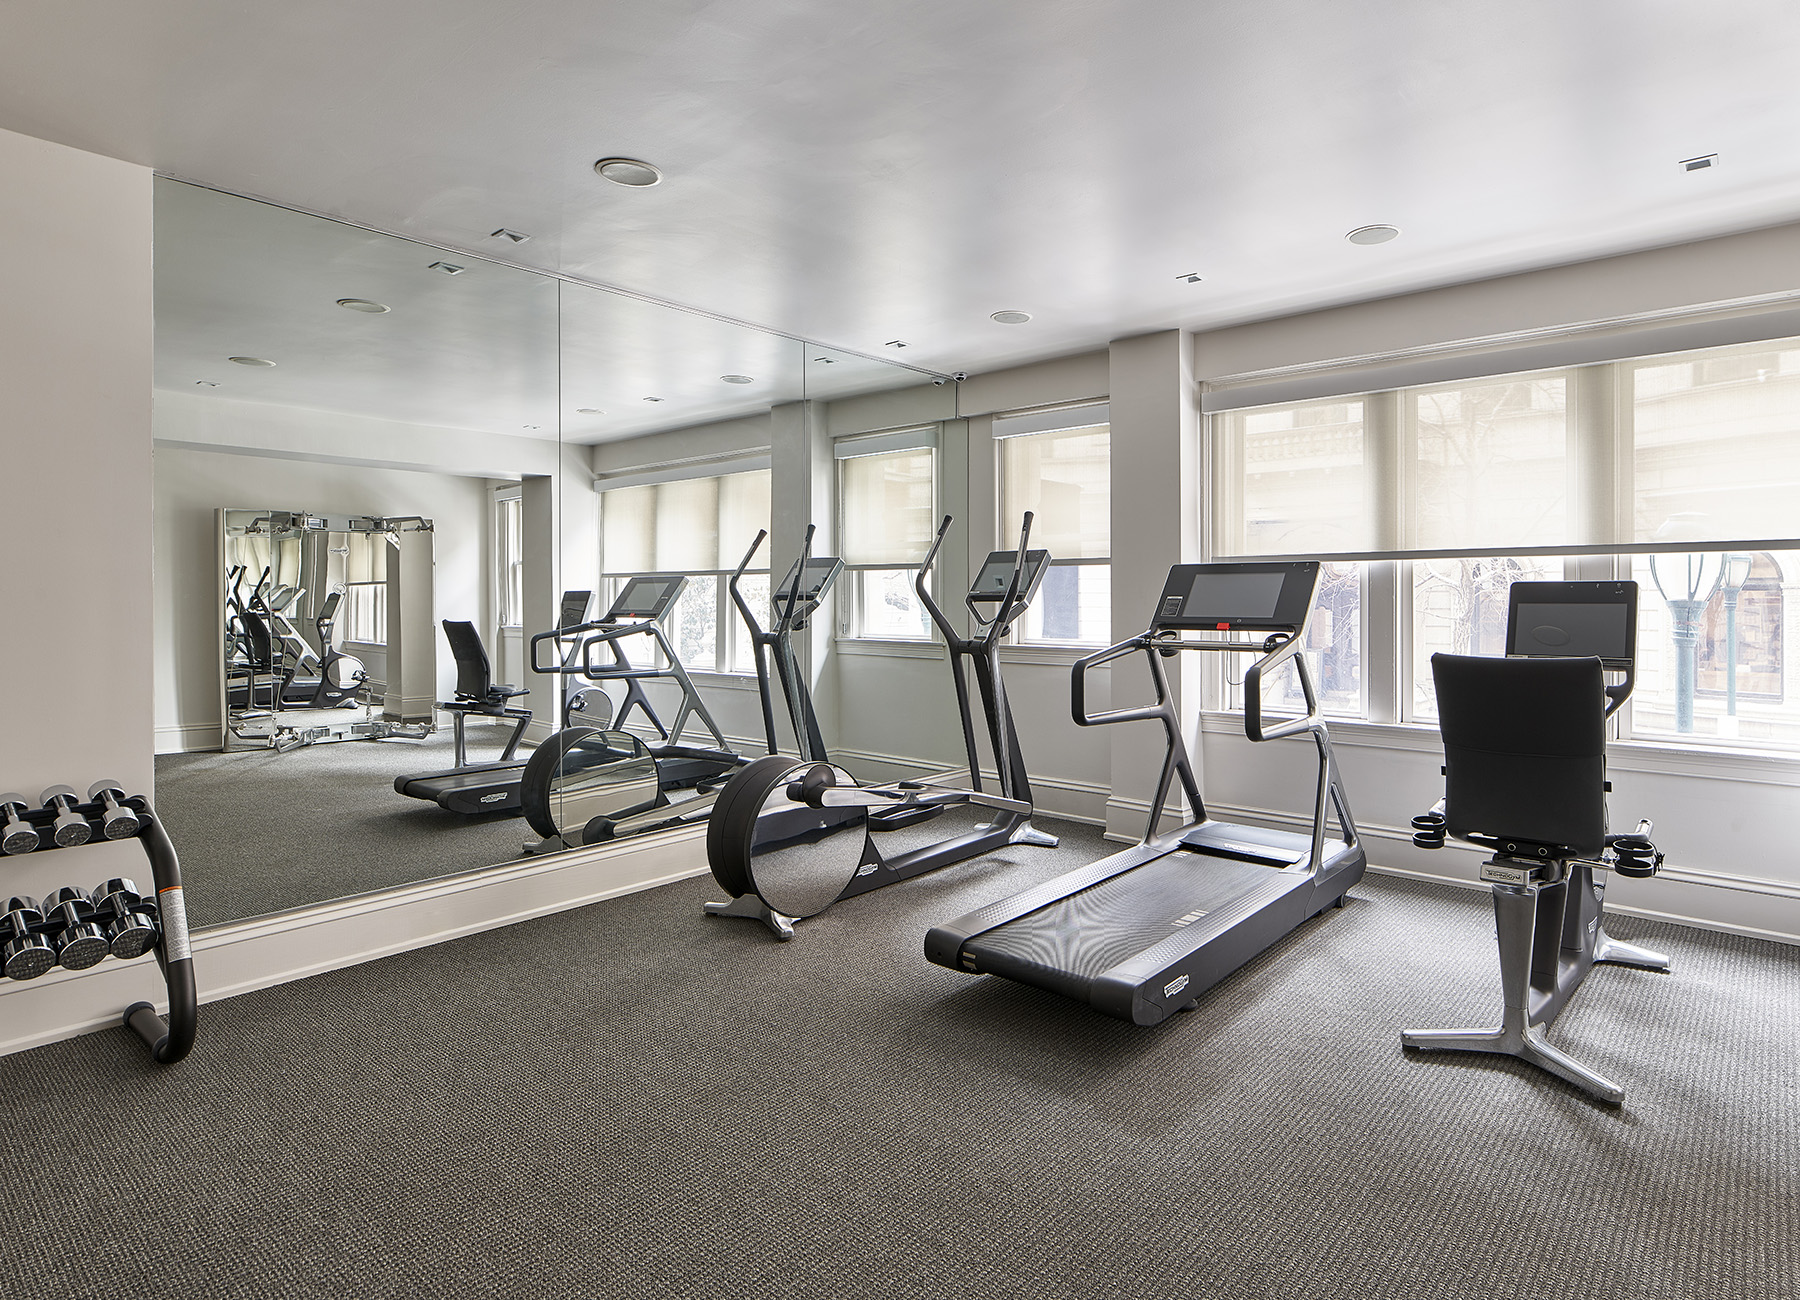 AKA Rittenhouse Square fitness center with state-of-the-art cardio equipment